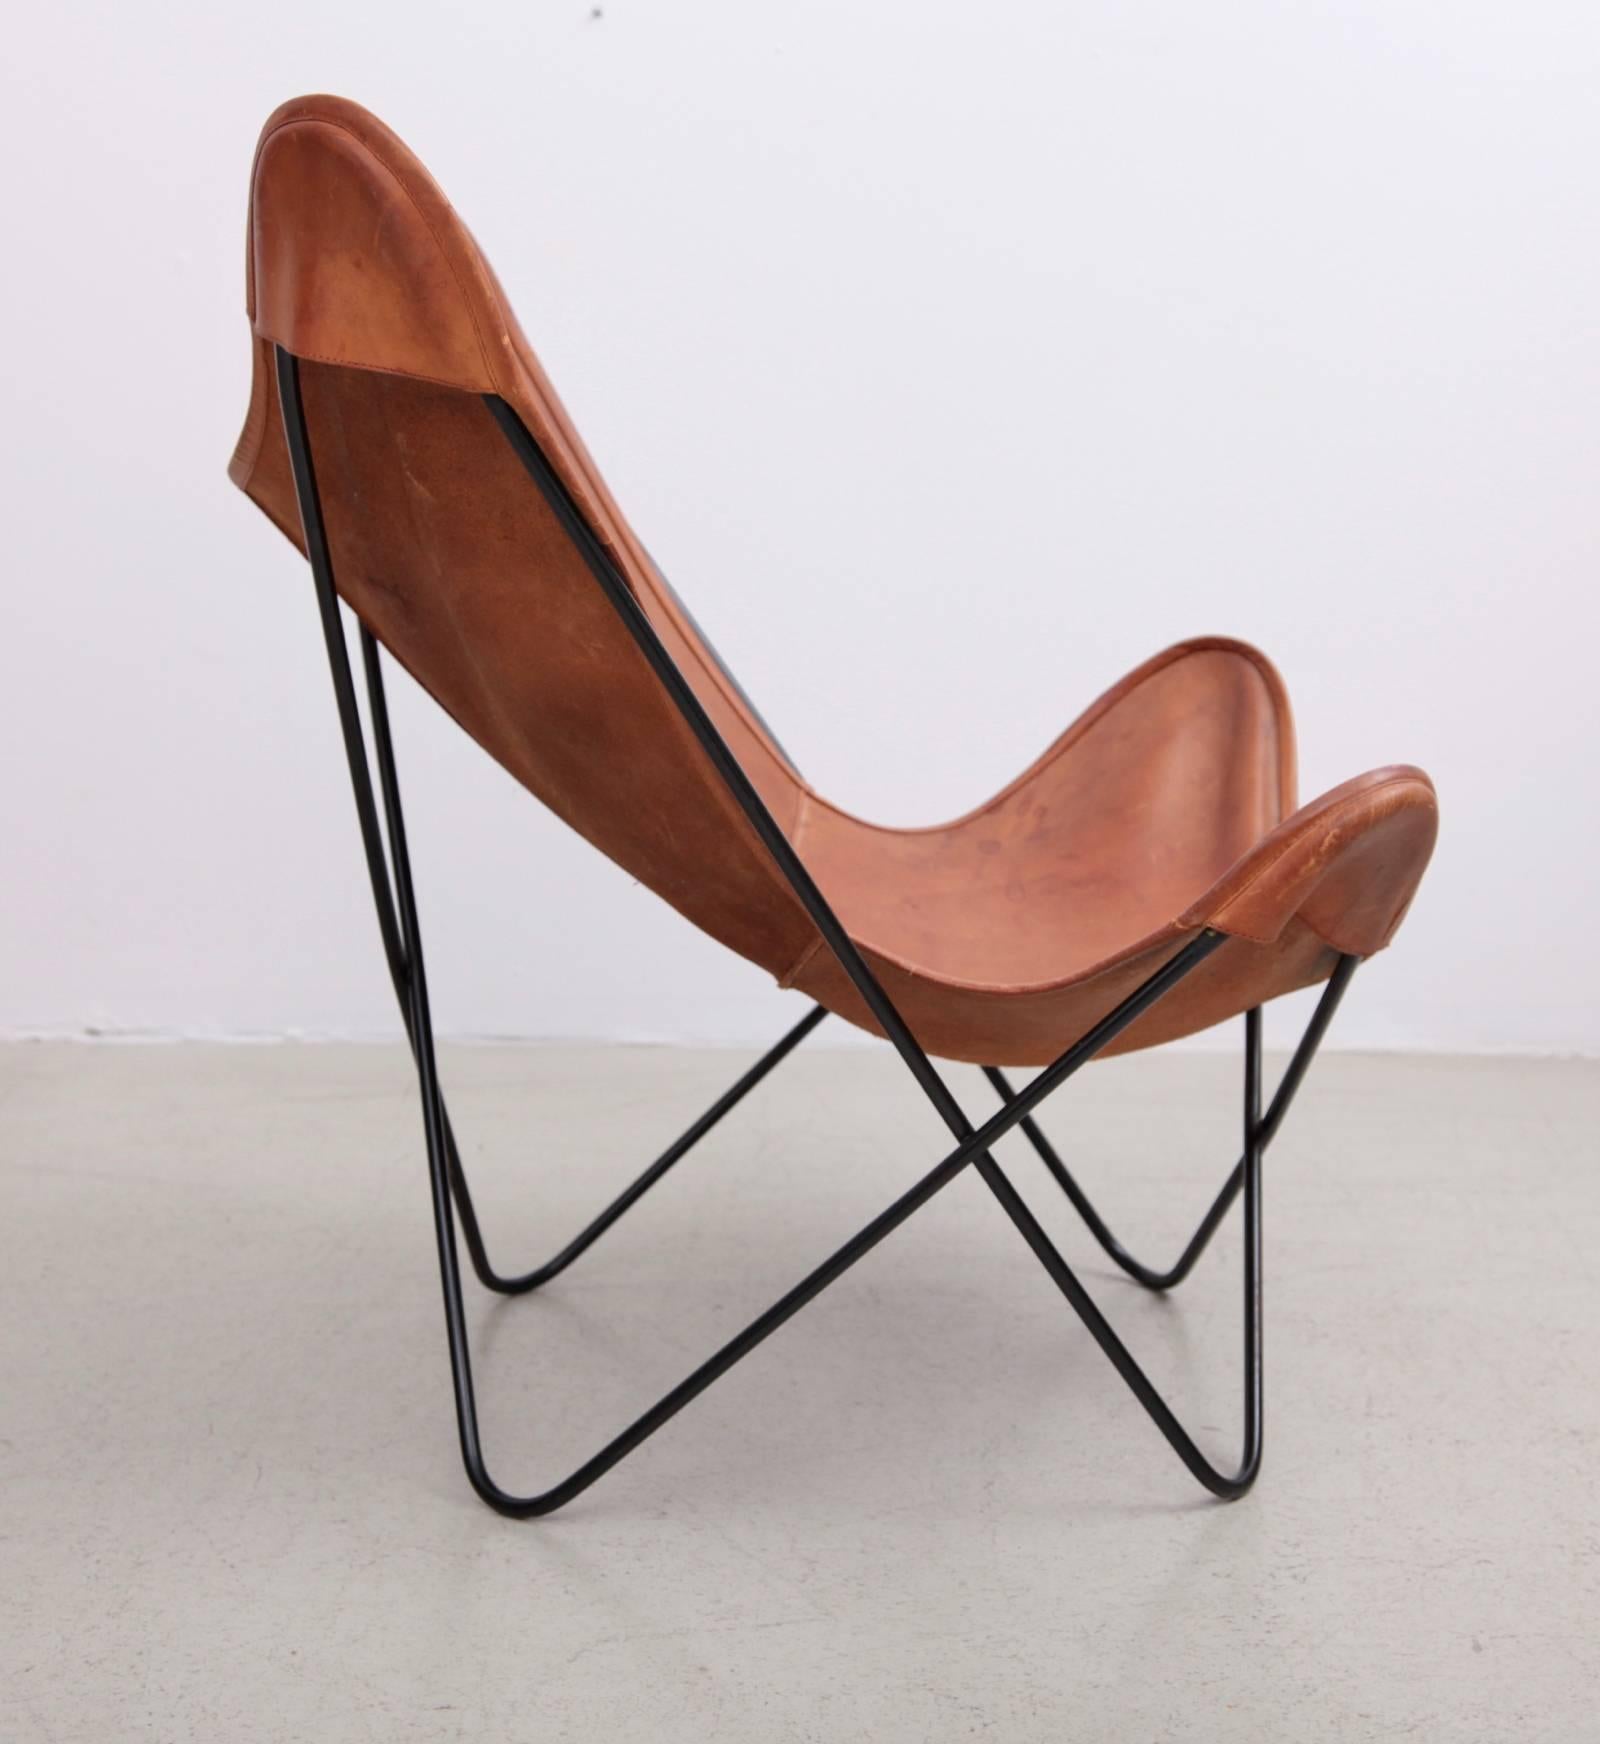 Butterfly chair by Knoll International with exceptionally beautiful original leather in cognac on a black base. Designed by J. Ferrari-Hardoy, J. Kurchan, A. Bonet in 1938. Manufactured from 1947-1975 by Knoll International. The center has a